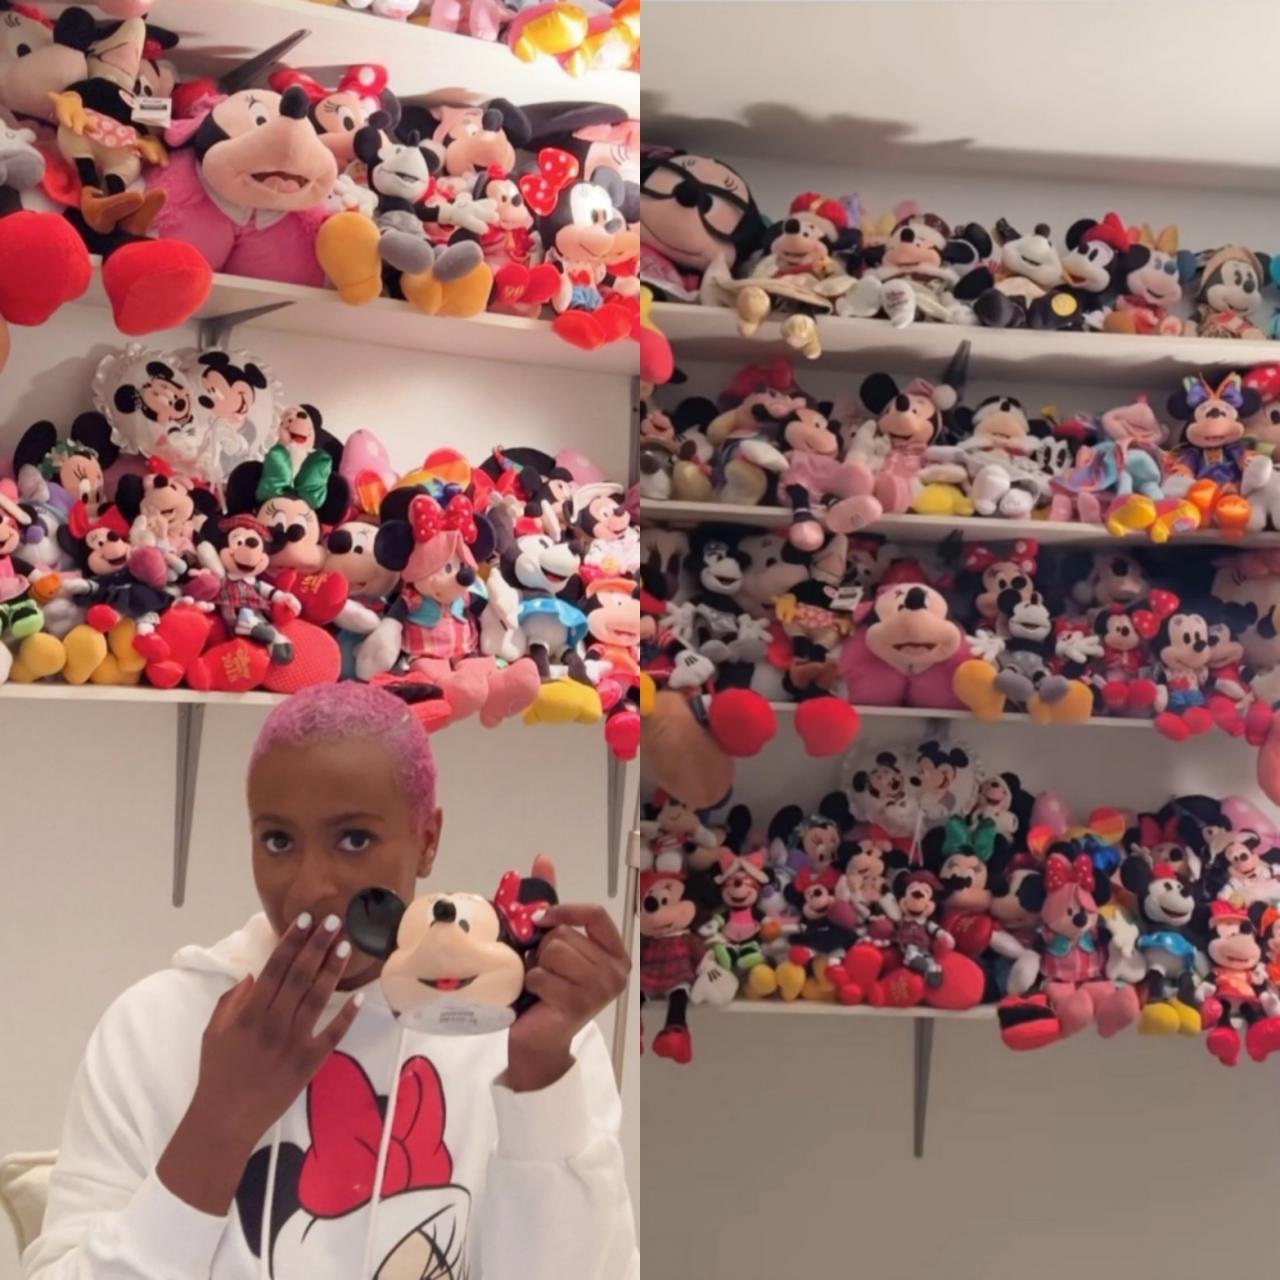 DJ Cuppy shows off her Minnie Mouse dolls collected over 10 years (video)